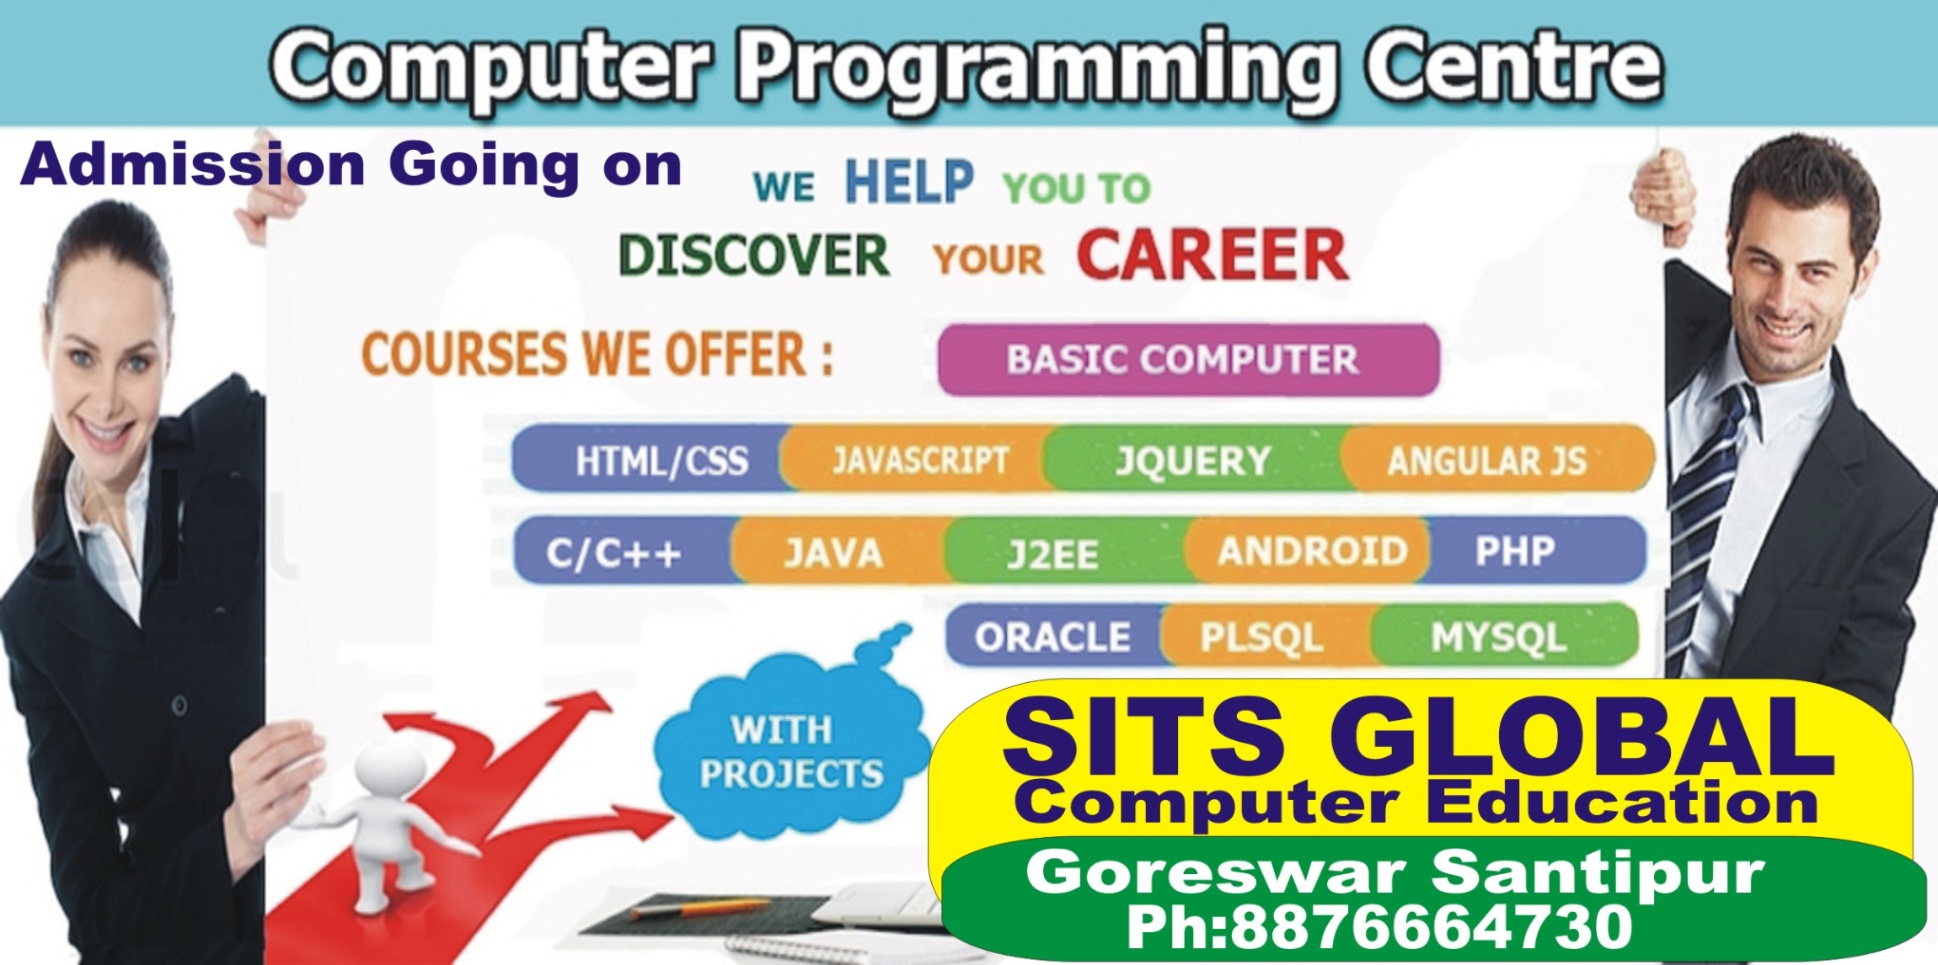 Admission Going On for Various Job Oriented Computer Courses